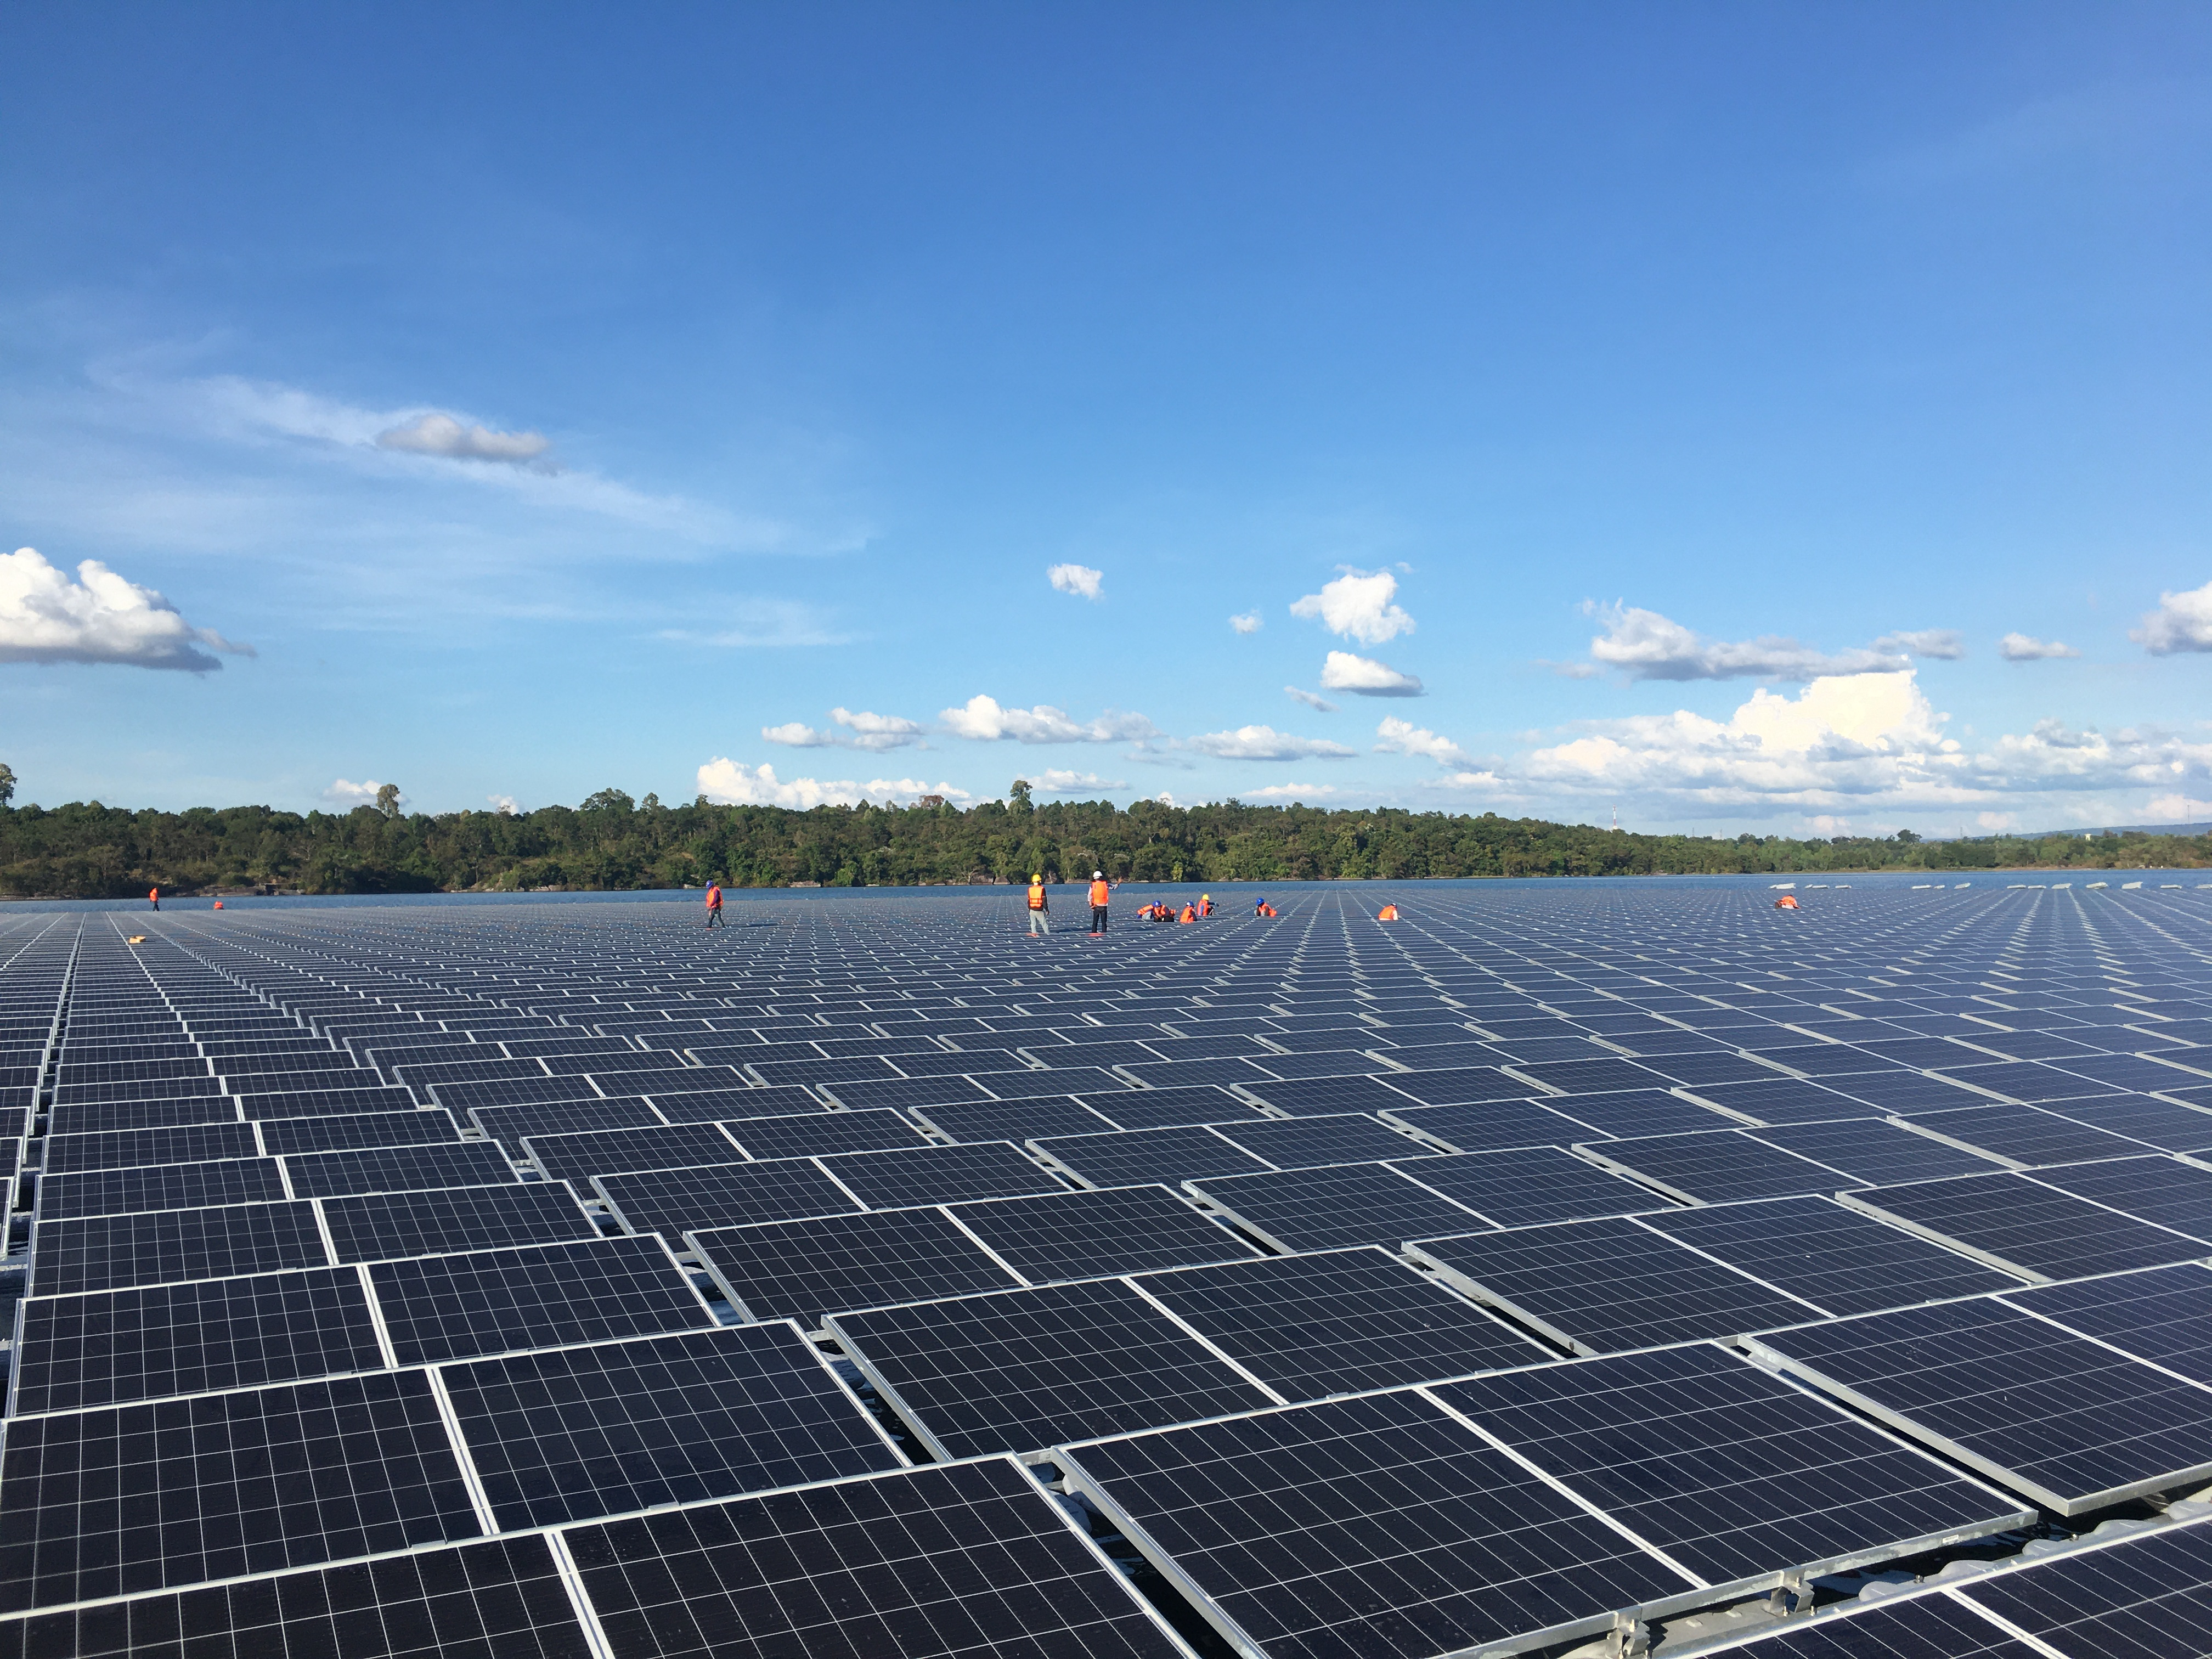 Intersect Power closes US$3.1 billion financing for US solar farms